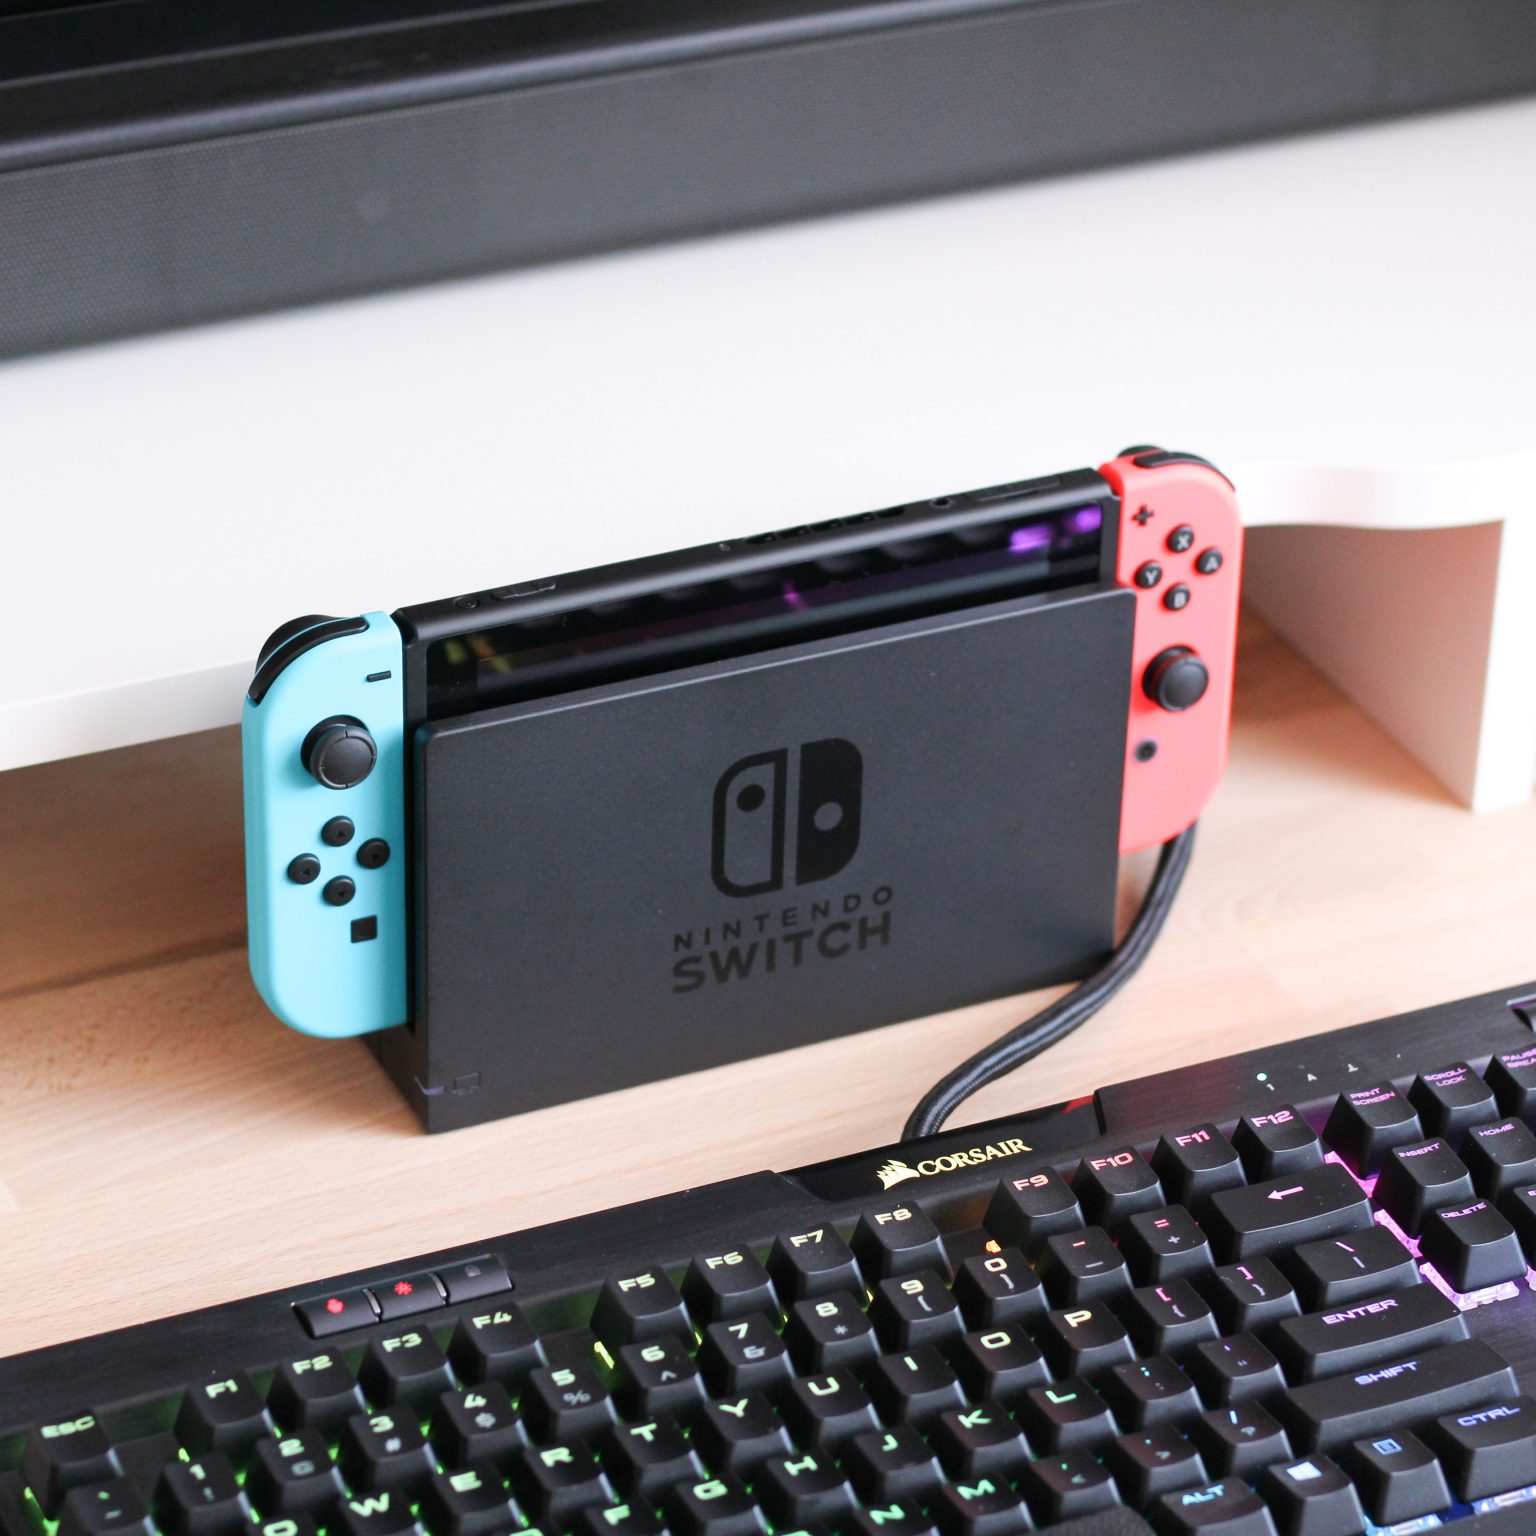 How to Find Lost Nintendo Switch in Your House